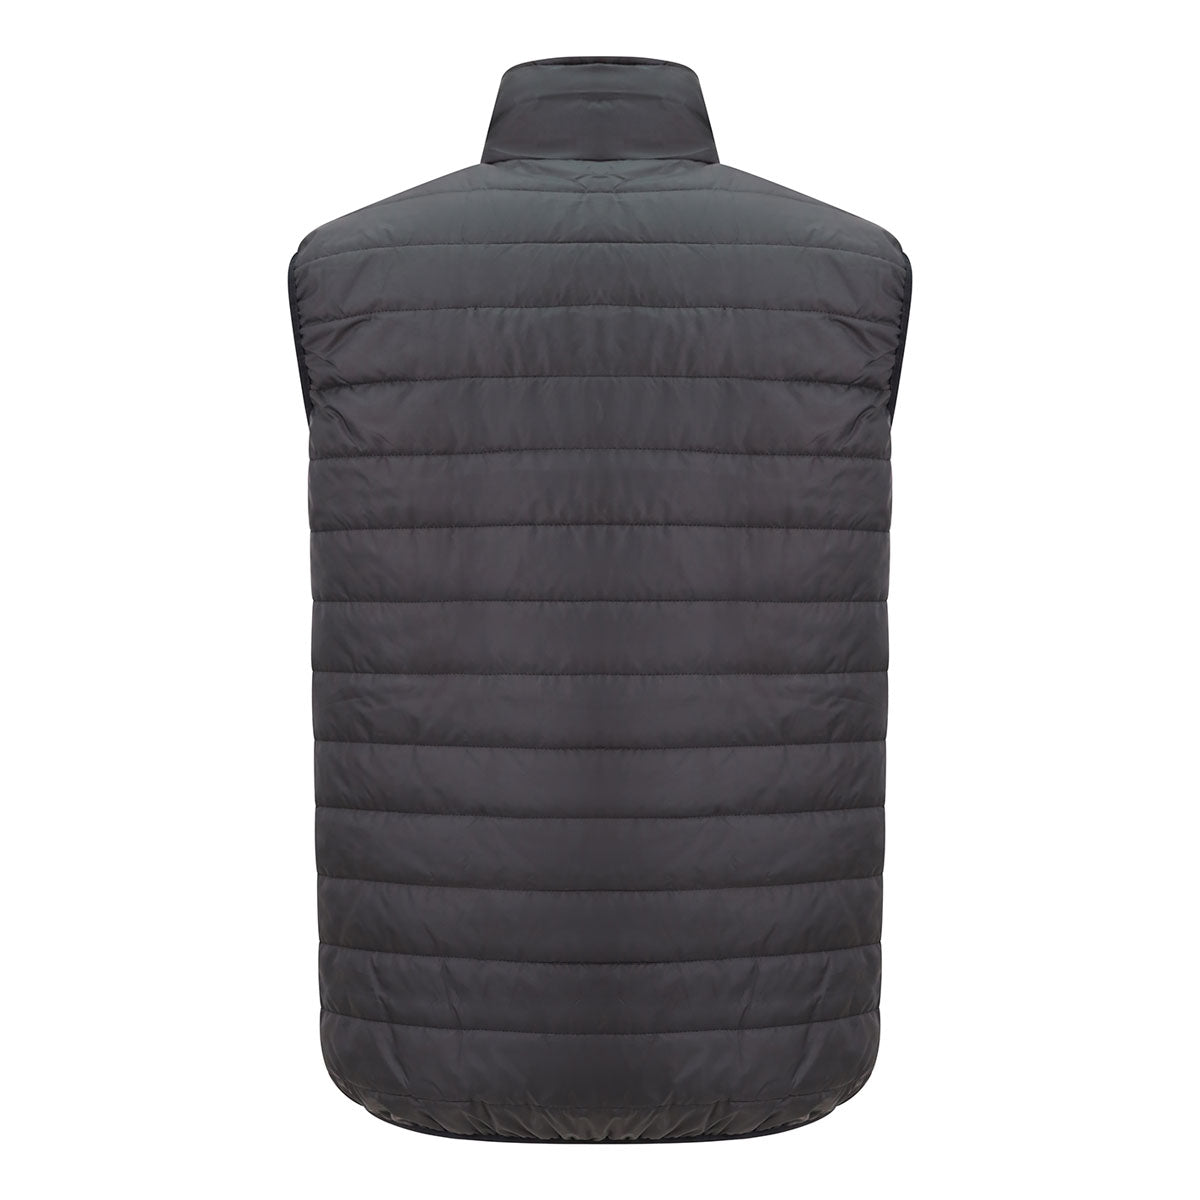 Mc Keever The Association of Irish Celtic Supporters Clubs Core 22 Padded Gilet - Adult - Black